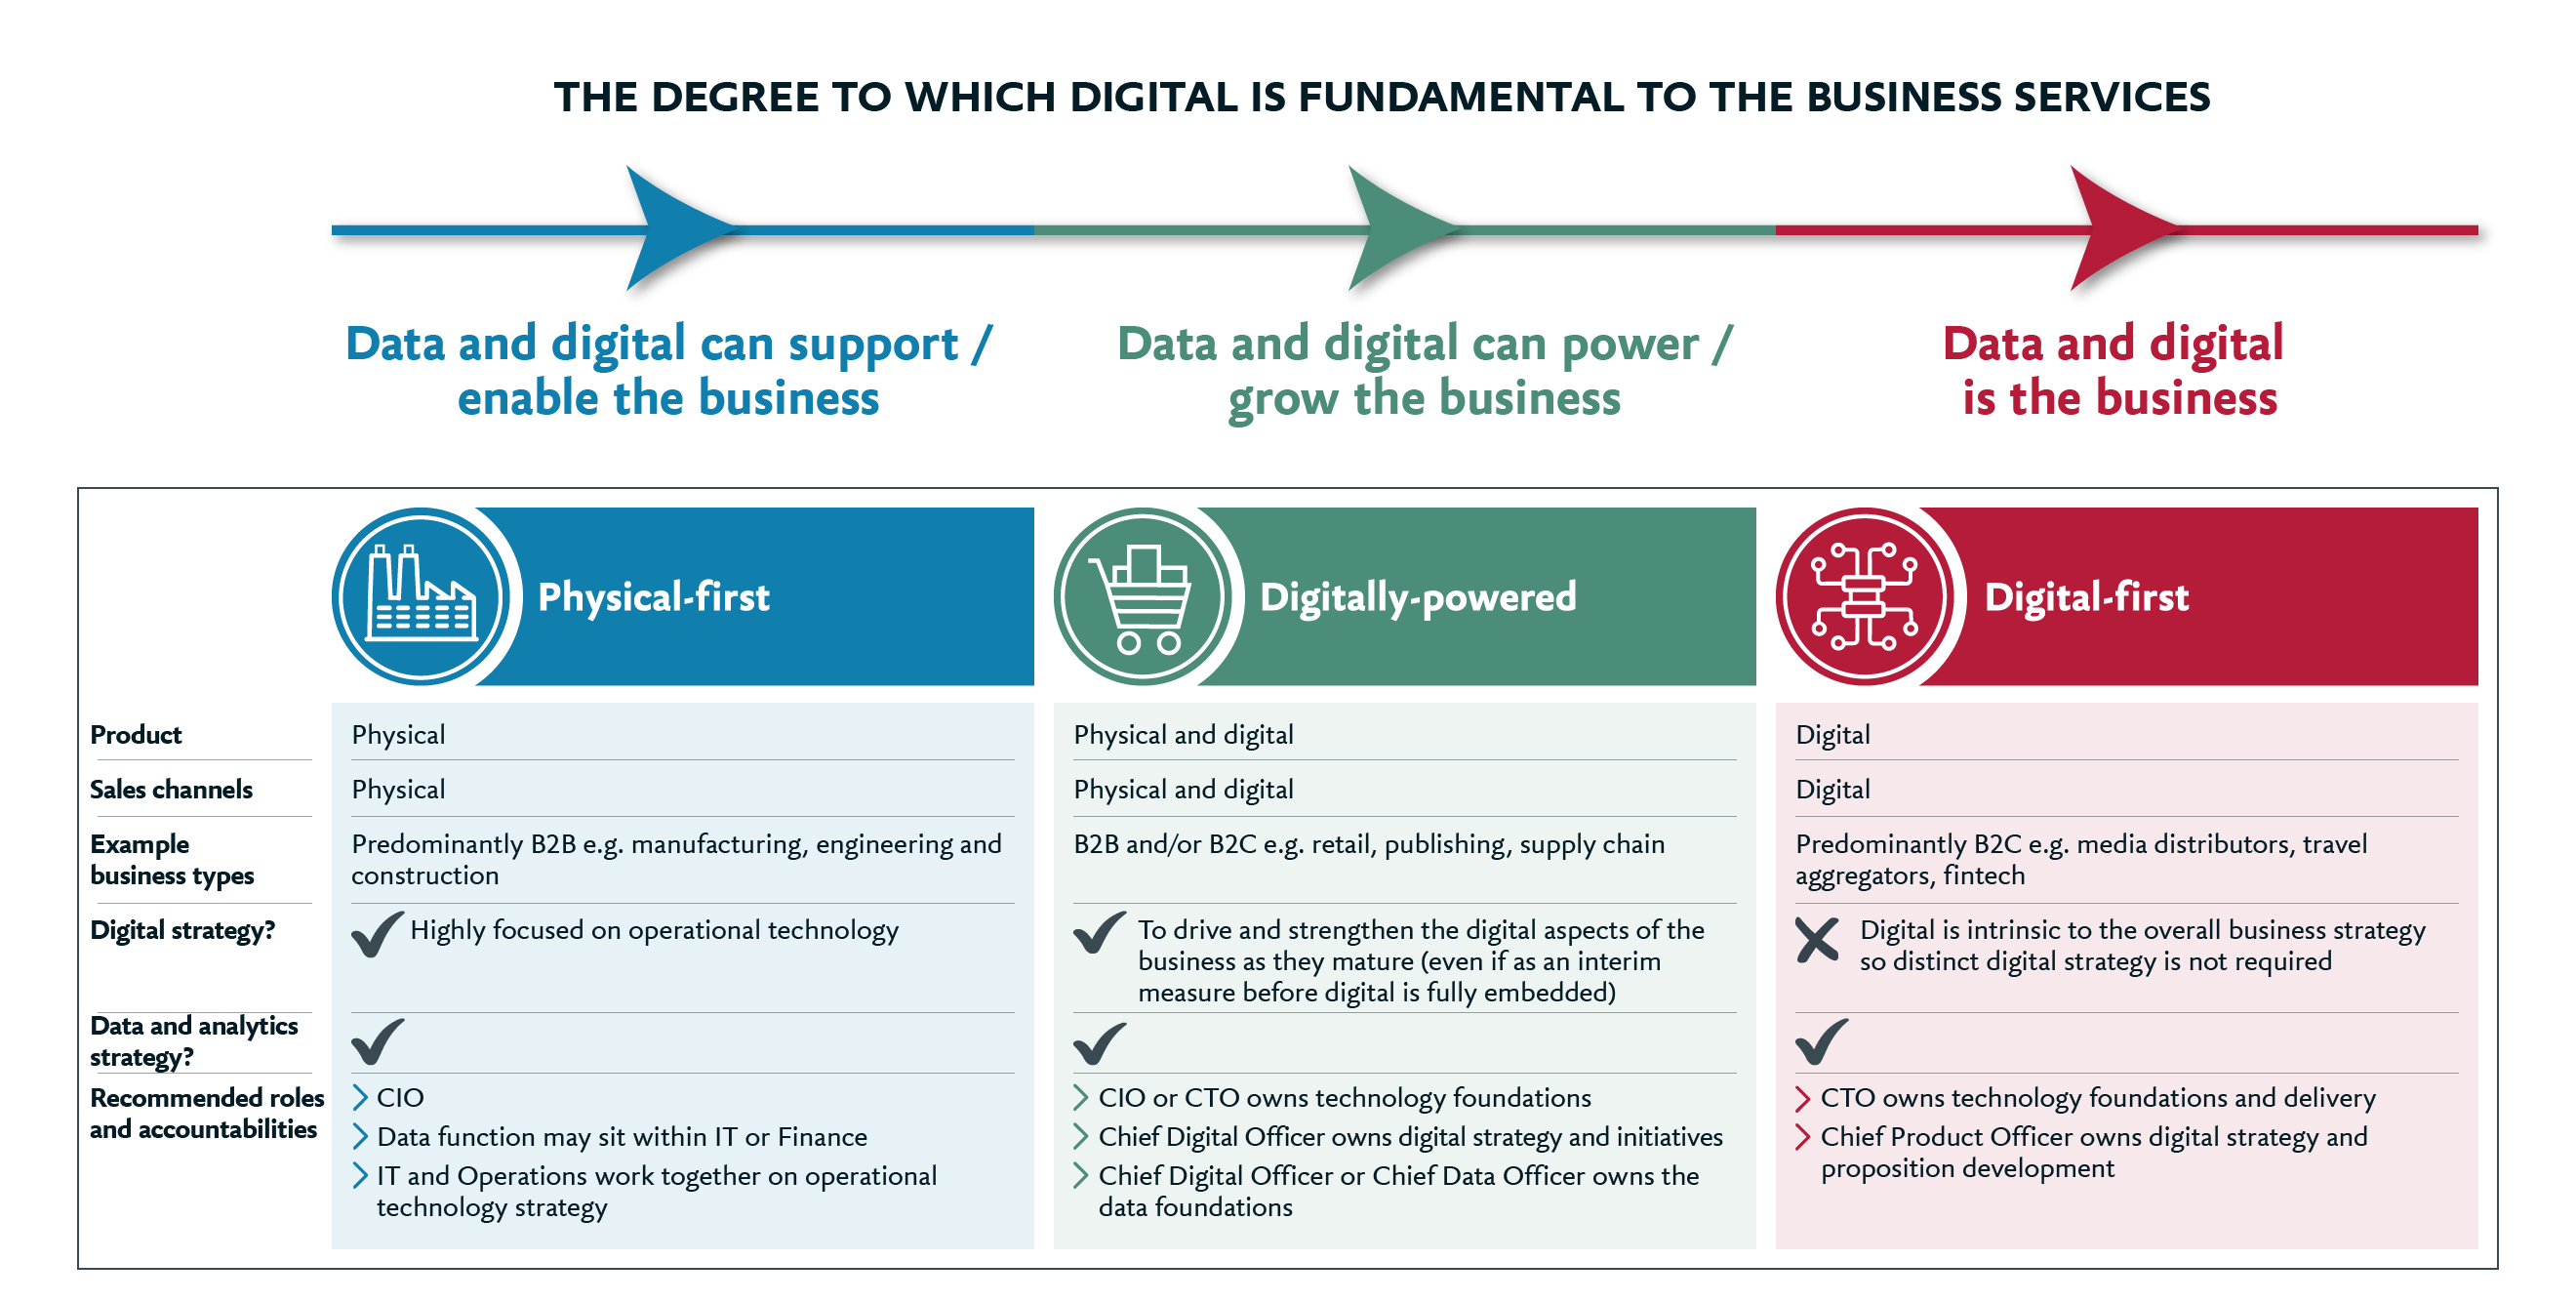 A graphic showing the degree to which digital is fundamental to the business services